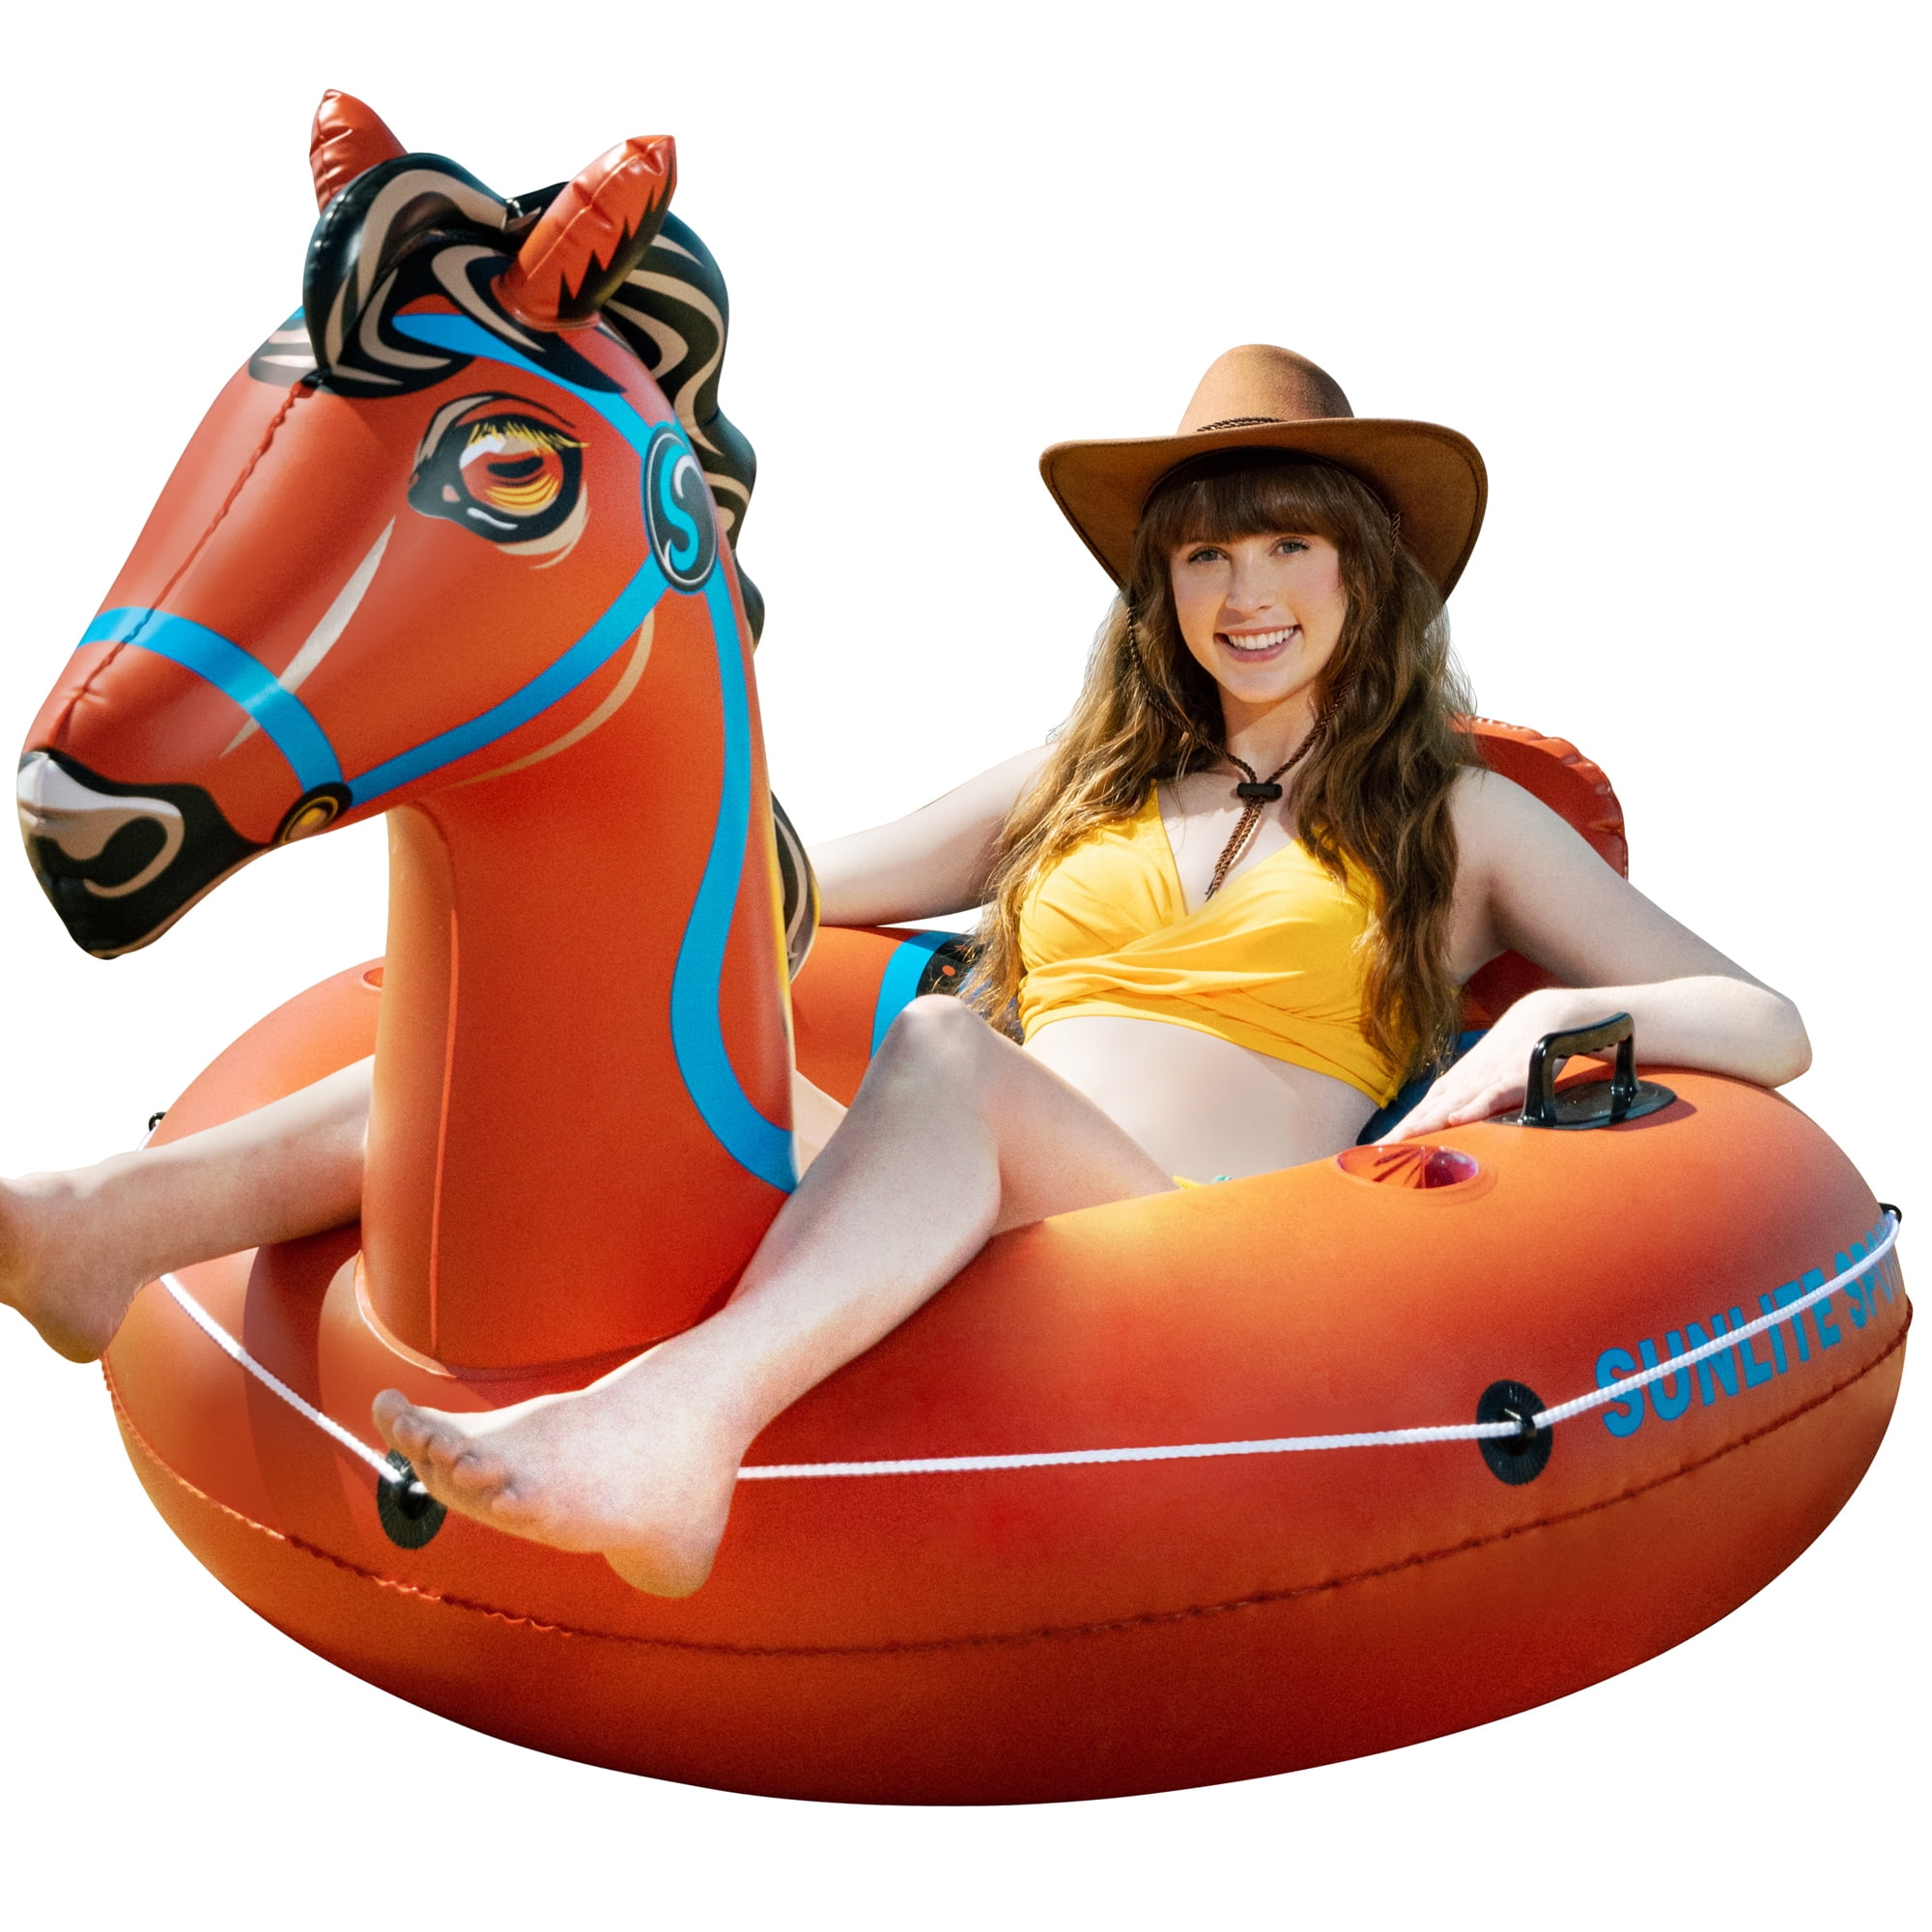 Sunlite Sports River Raft Inflatable 53 Inch, Heavy Duty Water Float to  Lounge Above Lake and River, Outdoor Water Tube Sport Fun, Recreational  Use,